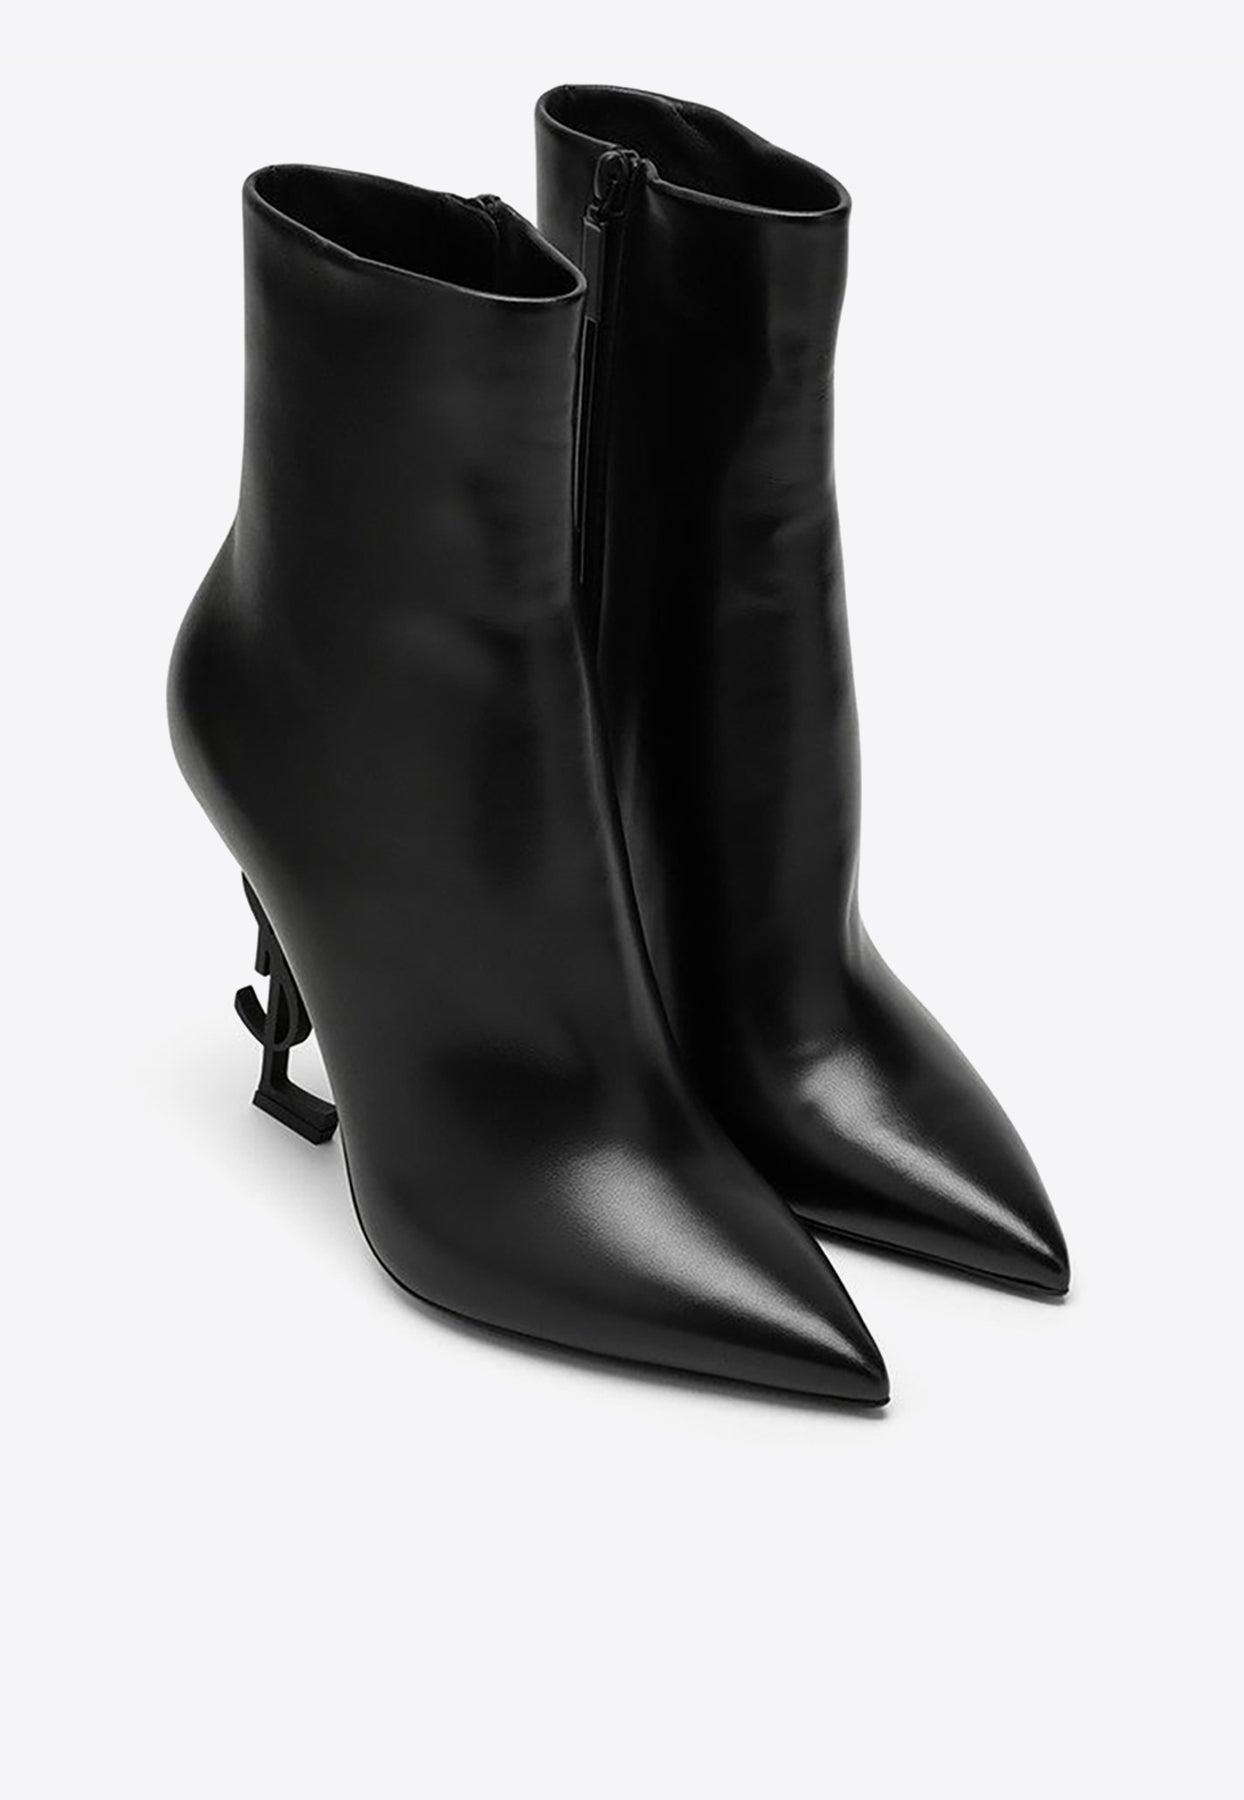 Saint Laurent Opyum 110 Leather Ankle Boots in Black | Lyst